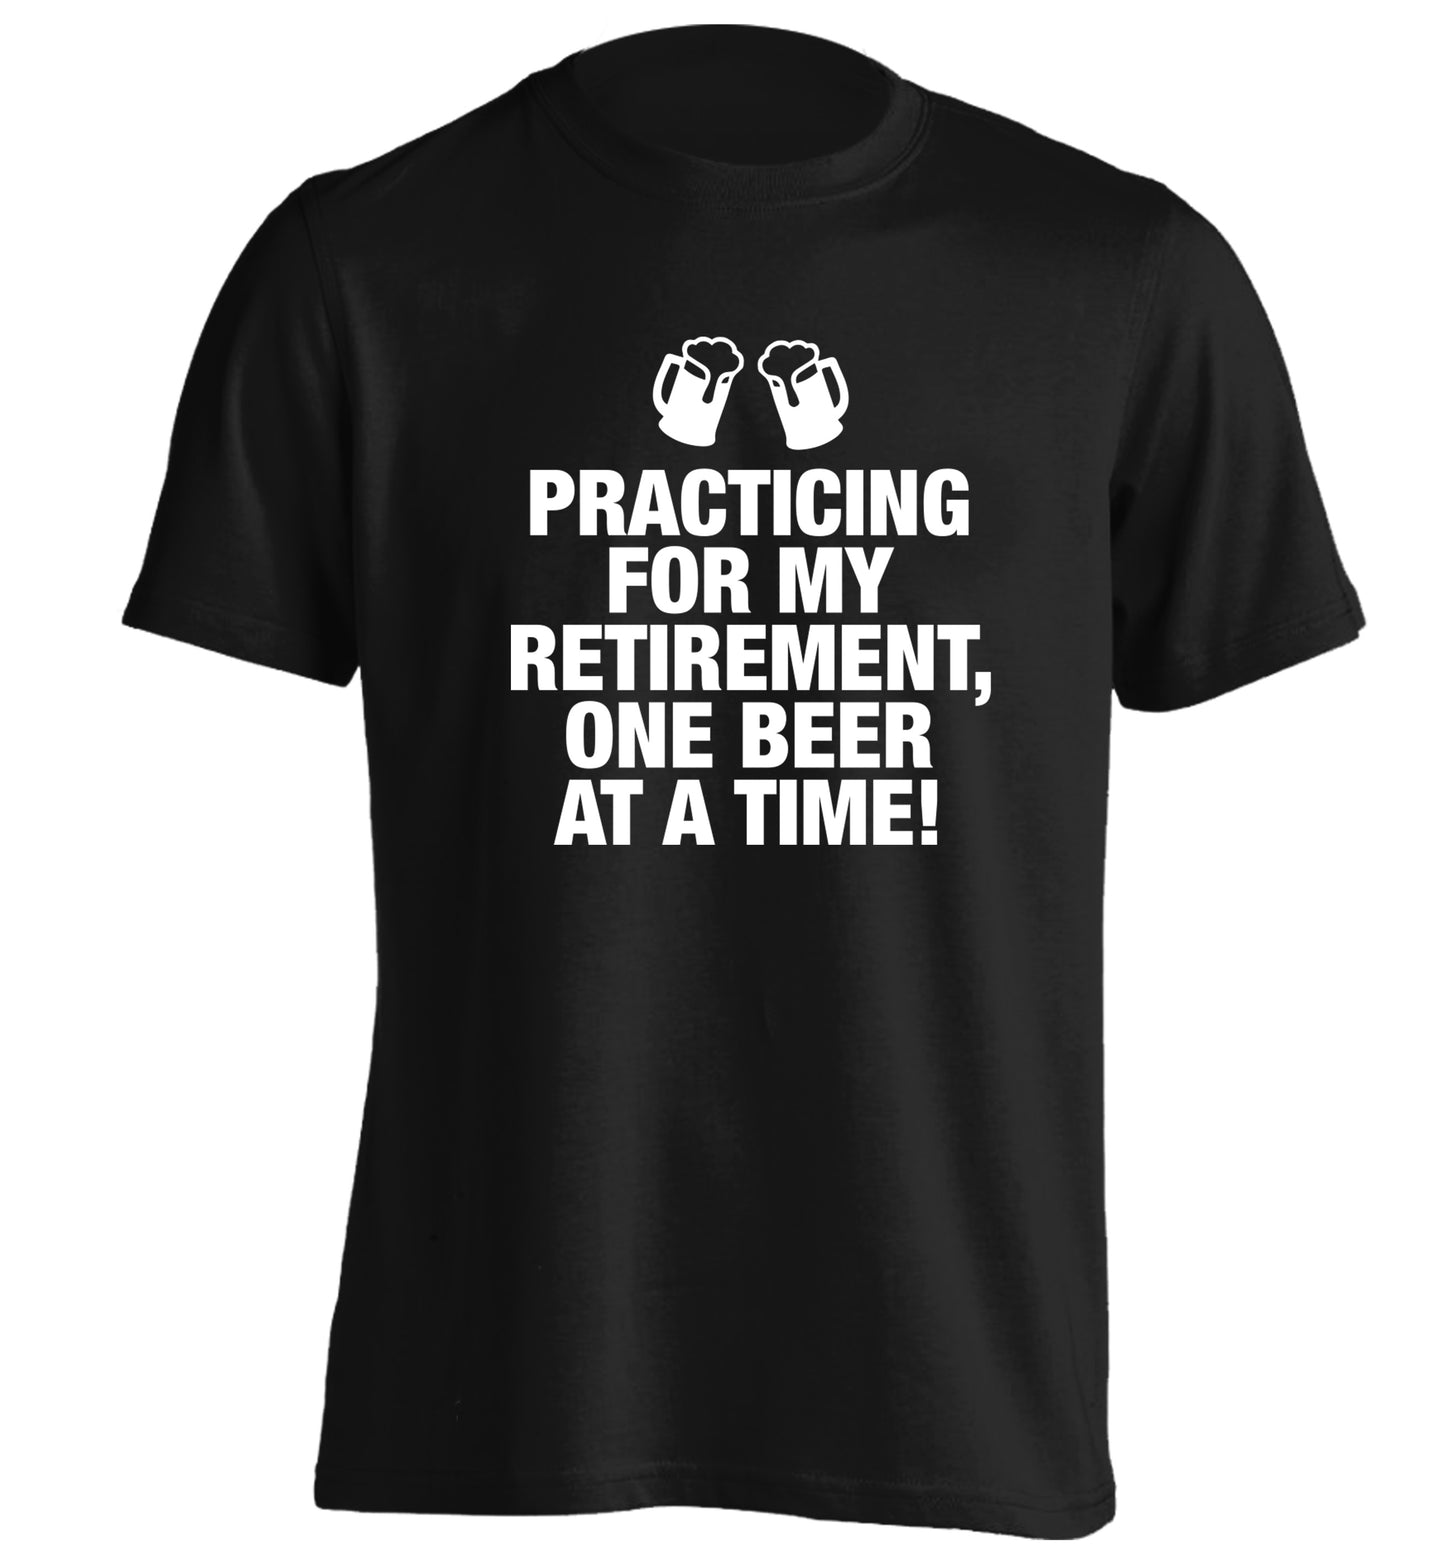 Practicing my retirement one beer at a time adults unisex black Tshirt 2XL